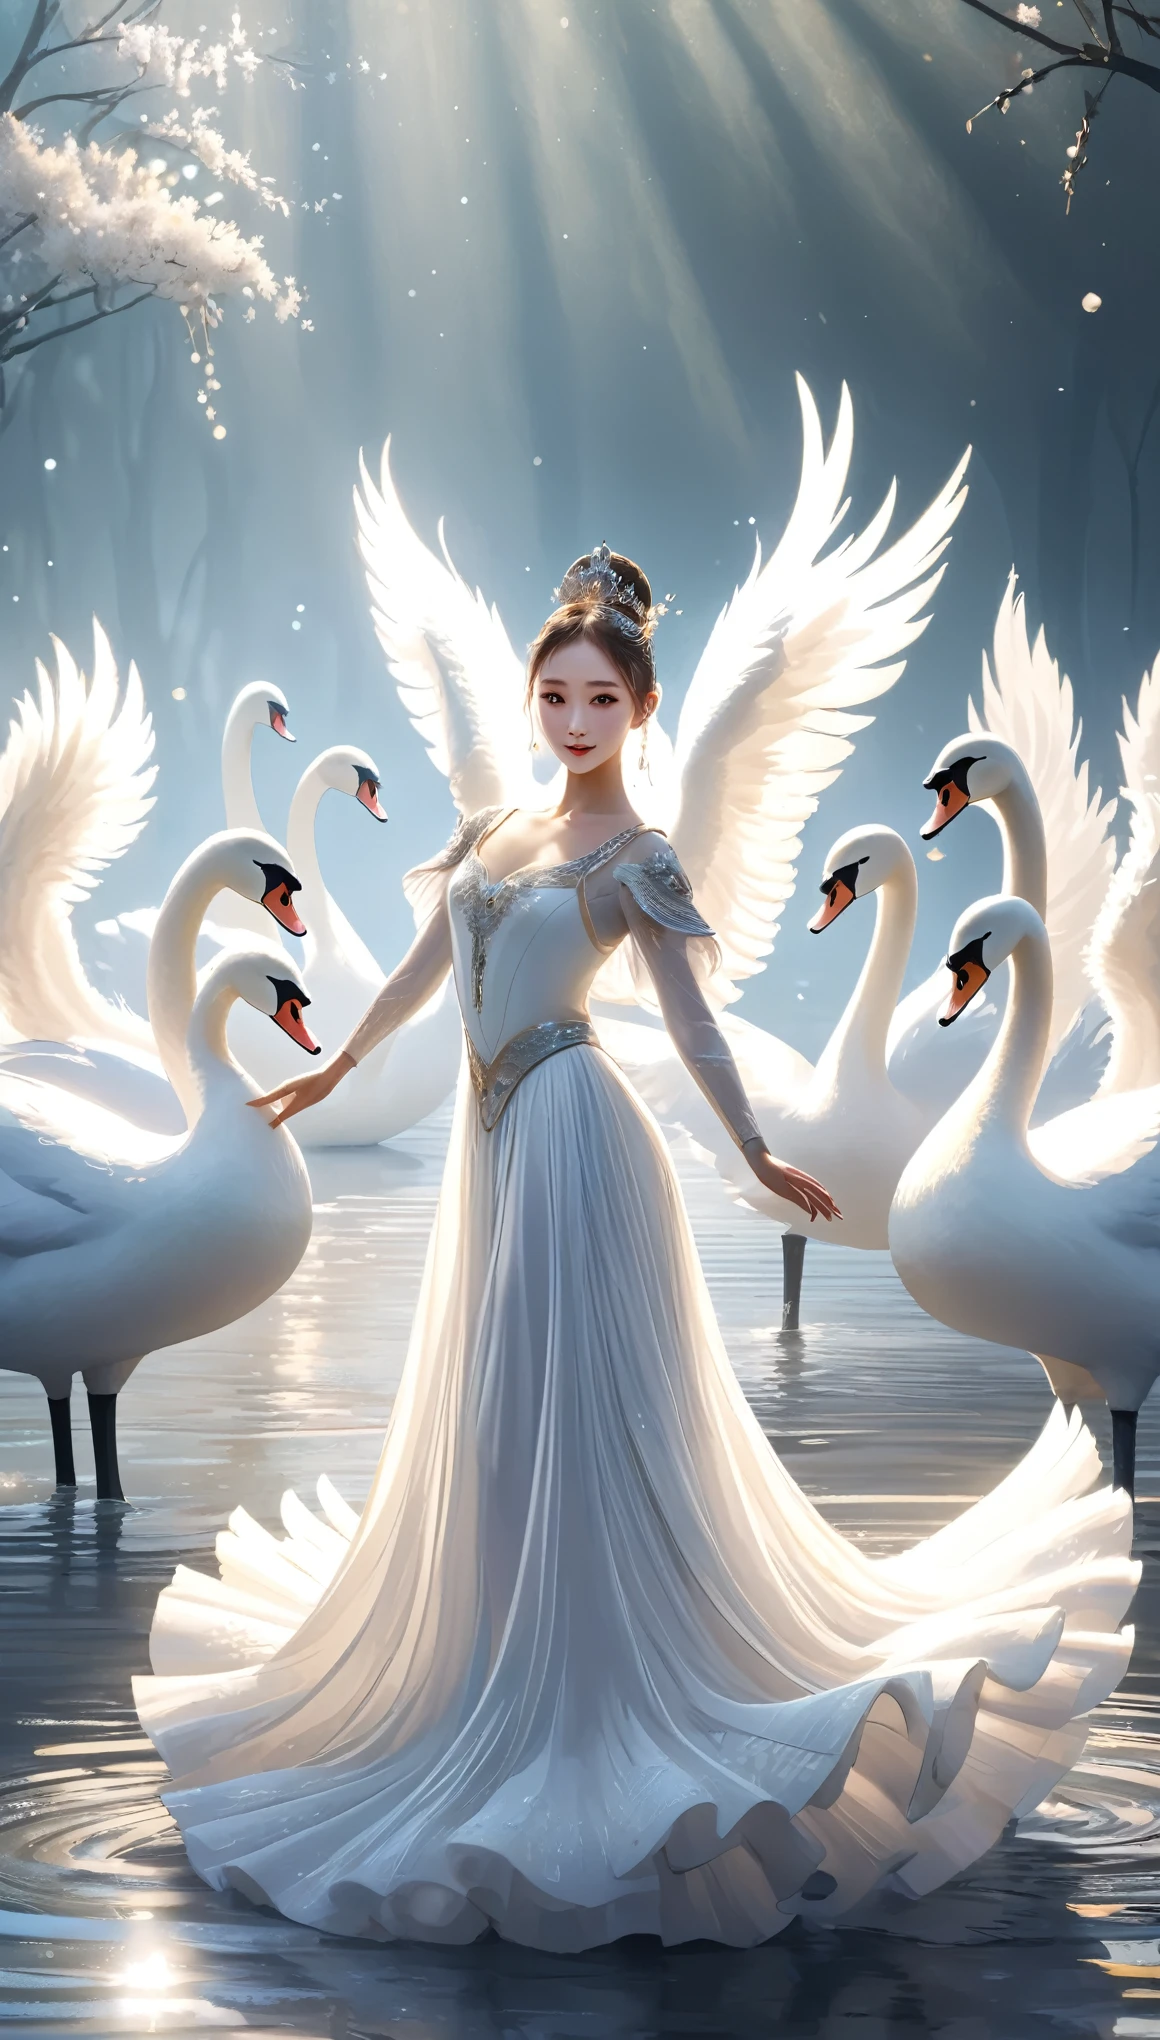 title:The Epochal Swan Transcendent Ballet - 8K Grand Masterpiece for Atmospheric and Vast Scenes Description: A flock of swans cleverly disguised as humans、In a sacred Sunday ceremony、Despite the confusion, they perform an exquisite and graceful dance.。The intricate costumes decorated with intricate patterns、Sparkling in the sun、Gives the image the illusion of depth and complexity。The soft, flowing fabric floats with the breeze.、Adds a captivating aura。The dance is complicated and full of costumes.、The result is the best image